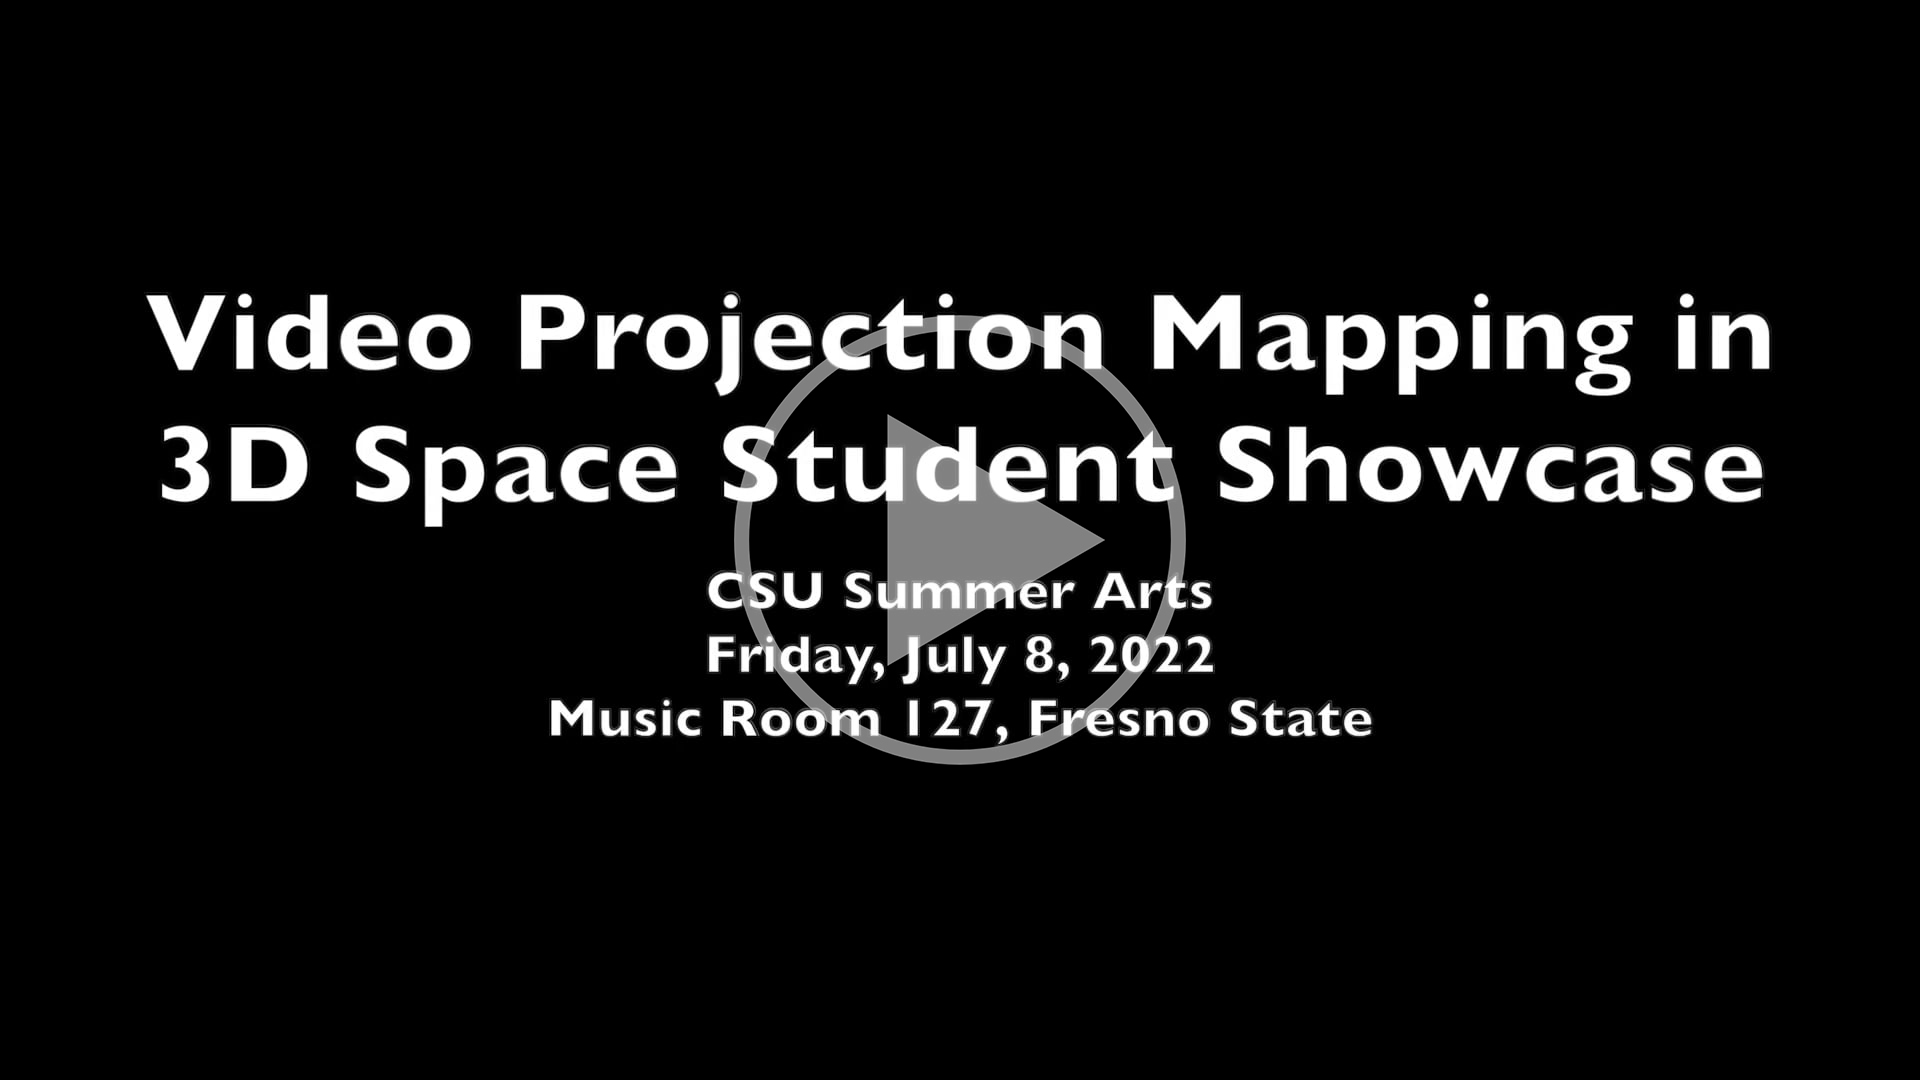 Play the 'Video Projection Mapping in 3D Space Student Showcase'